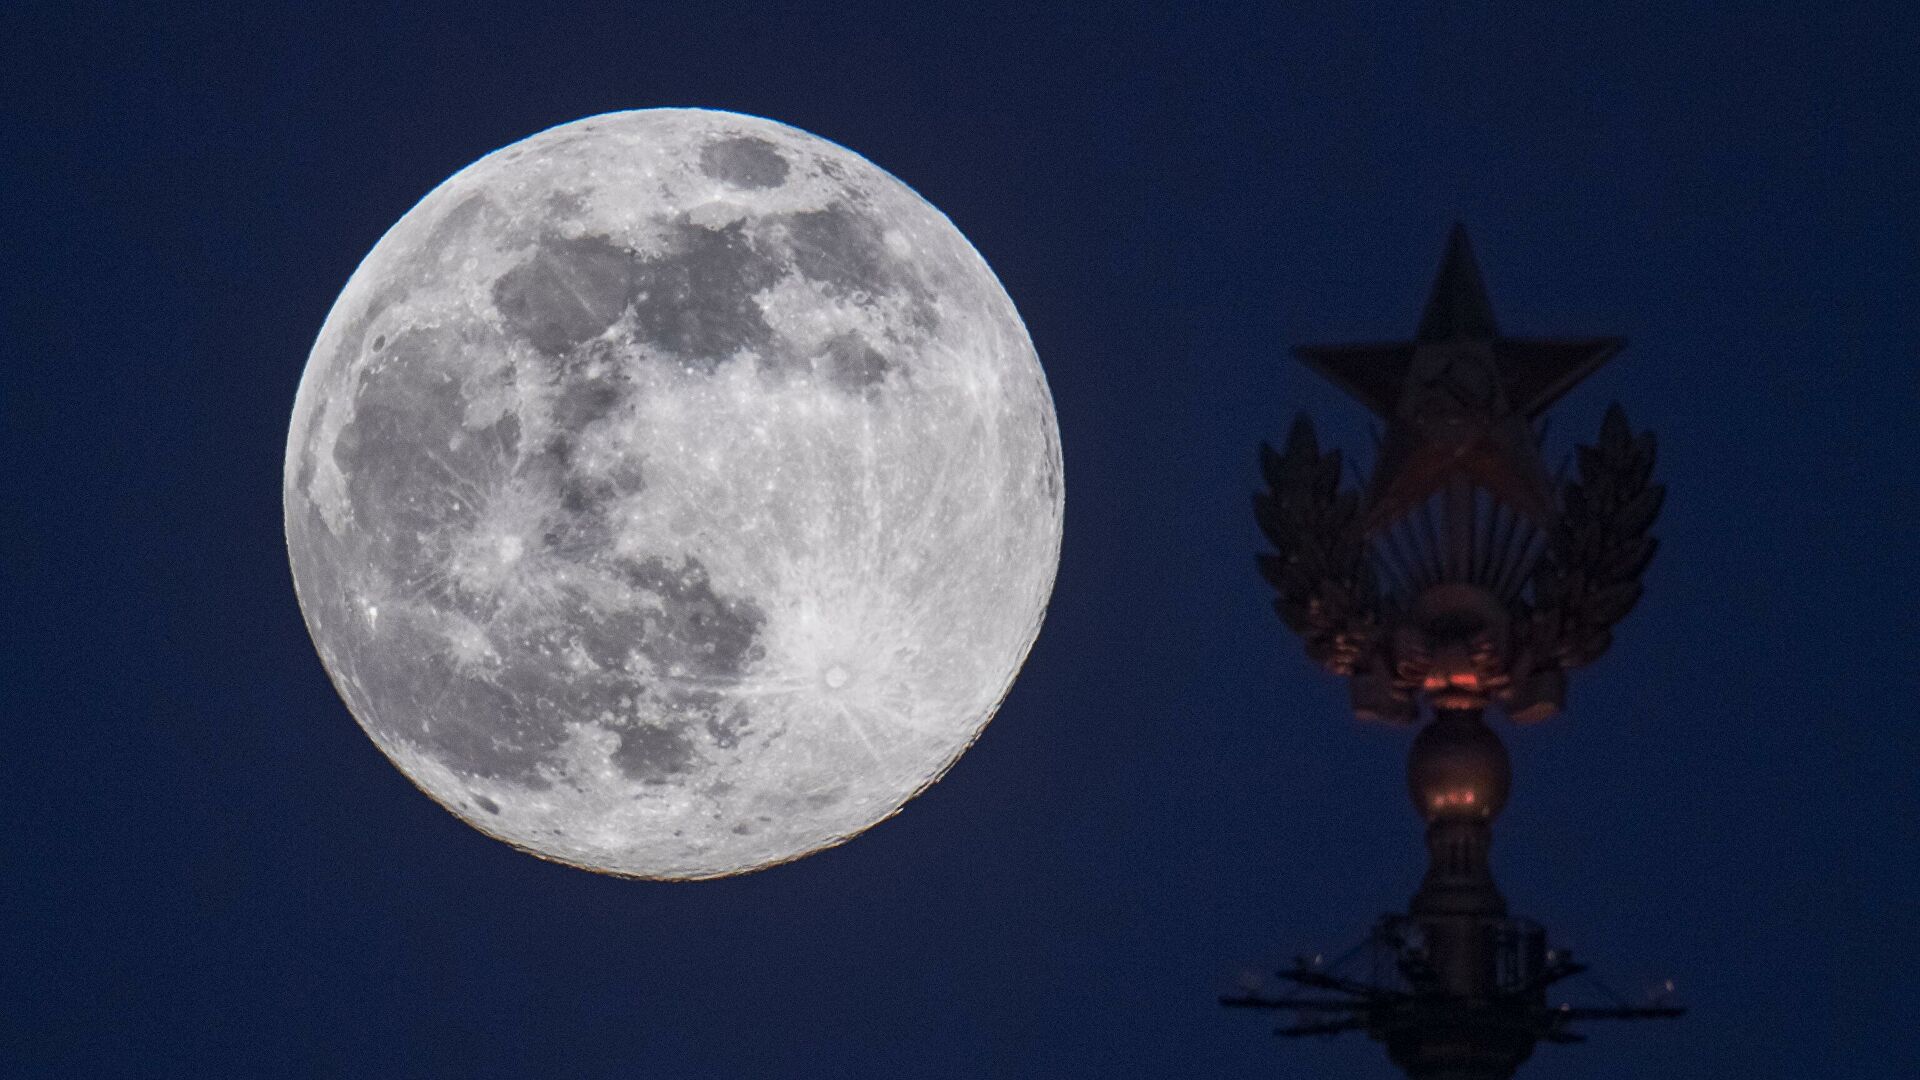 The supermoon of 2022 will come on July 13